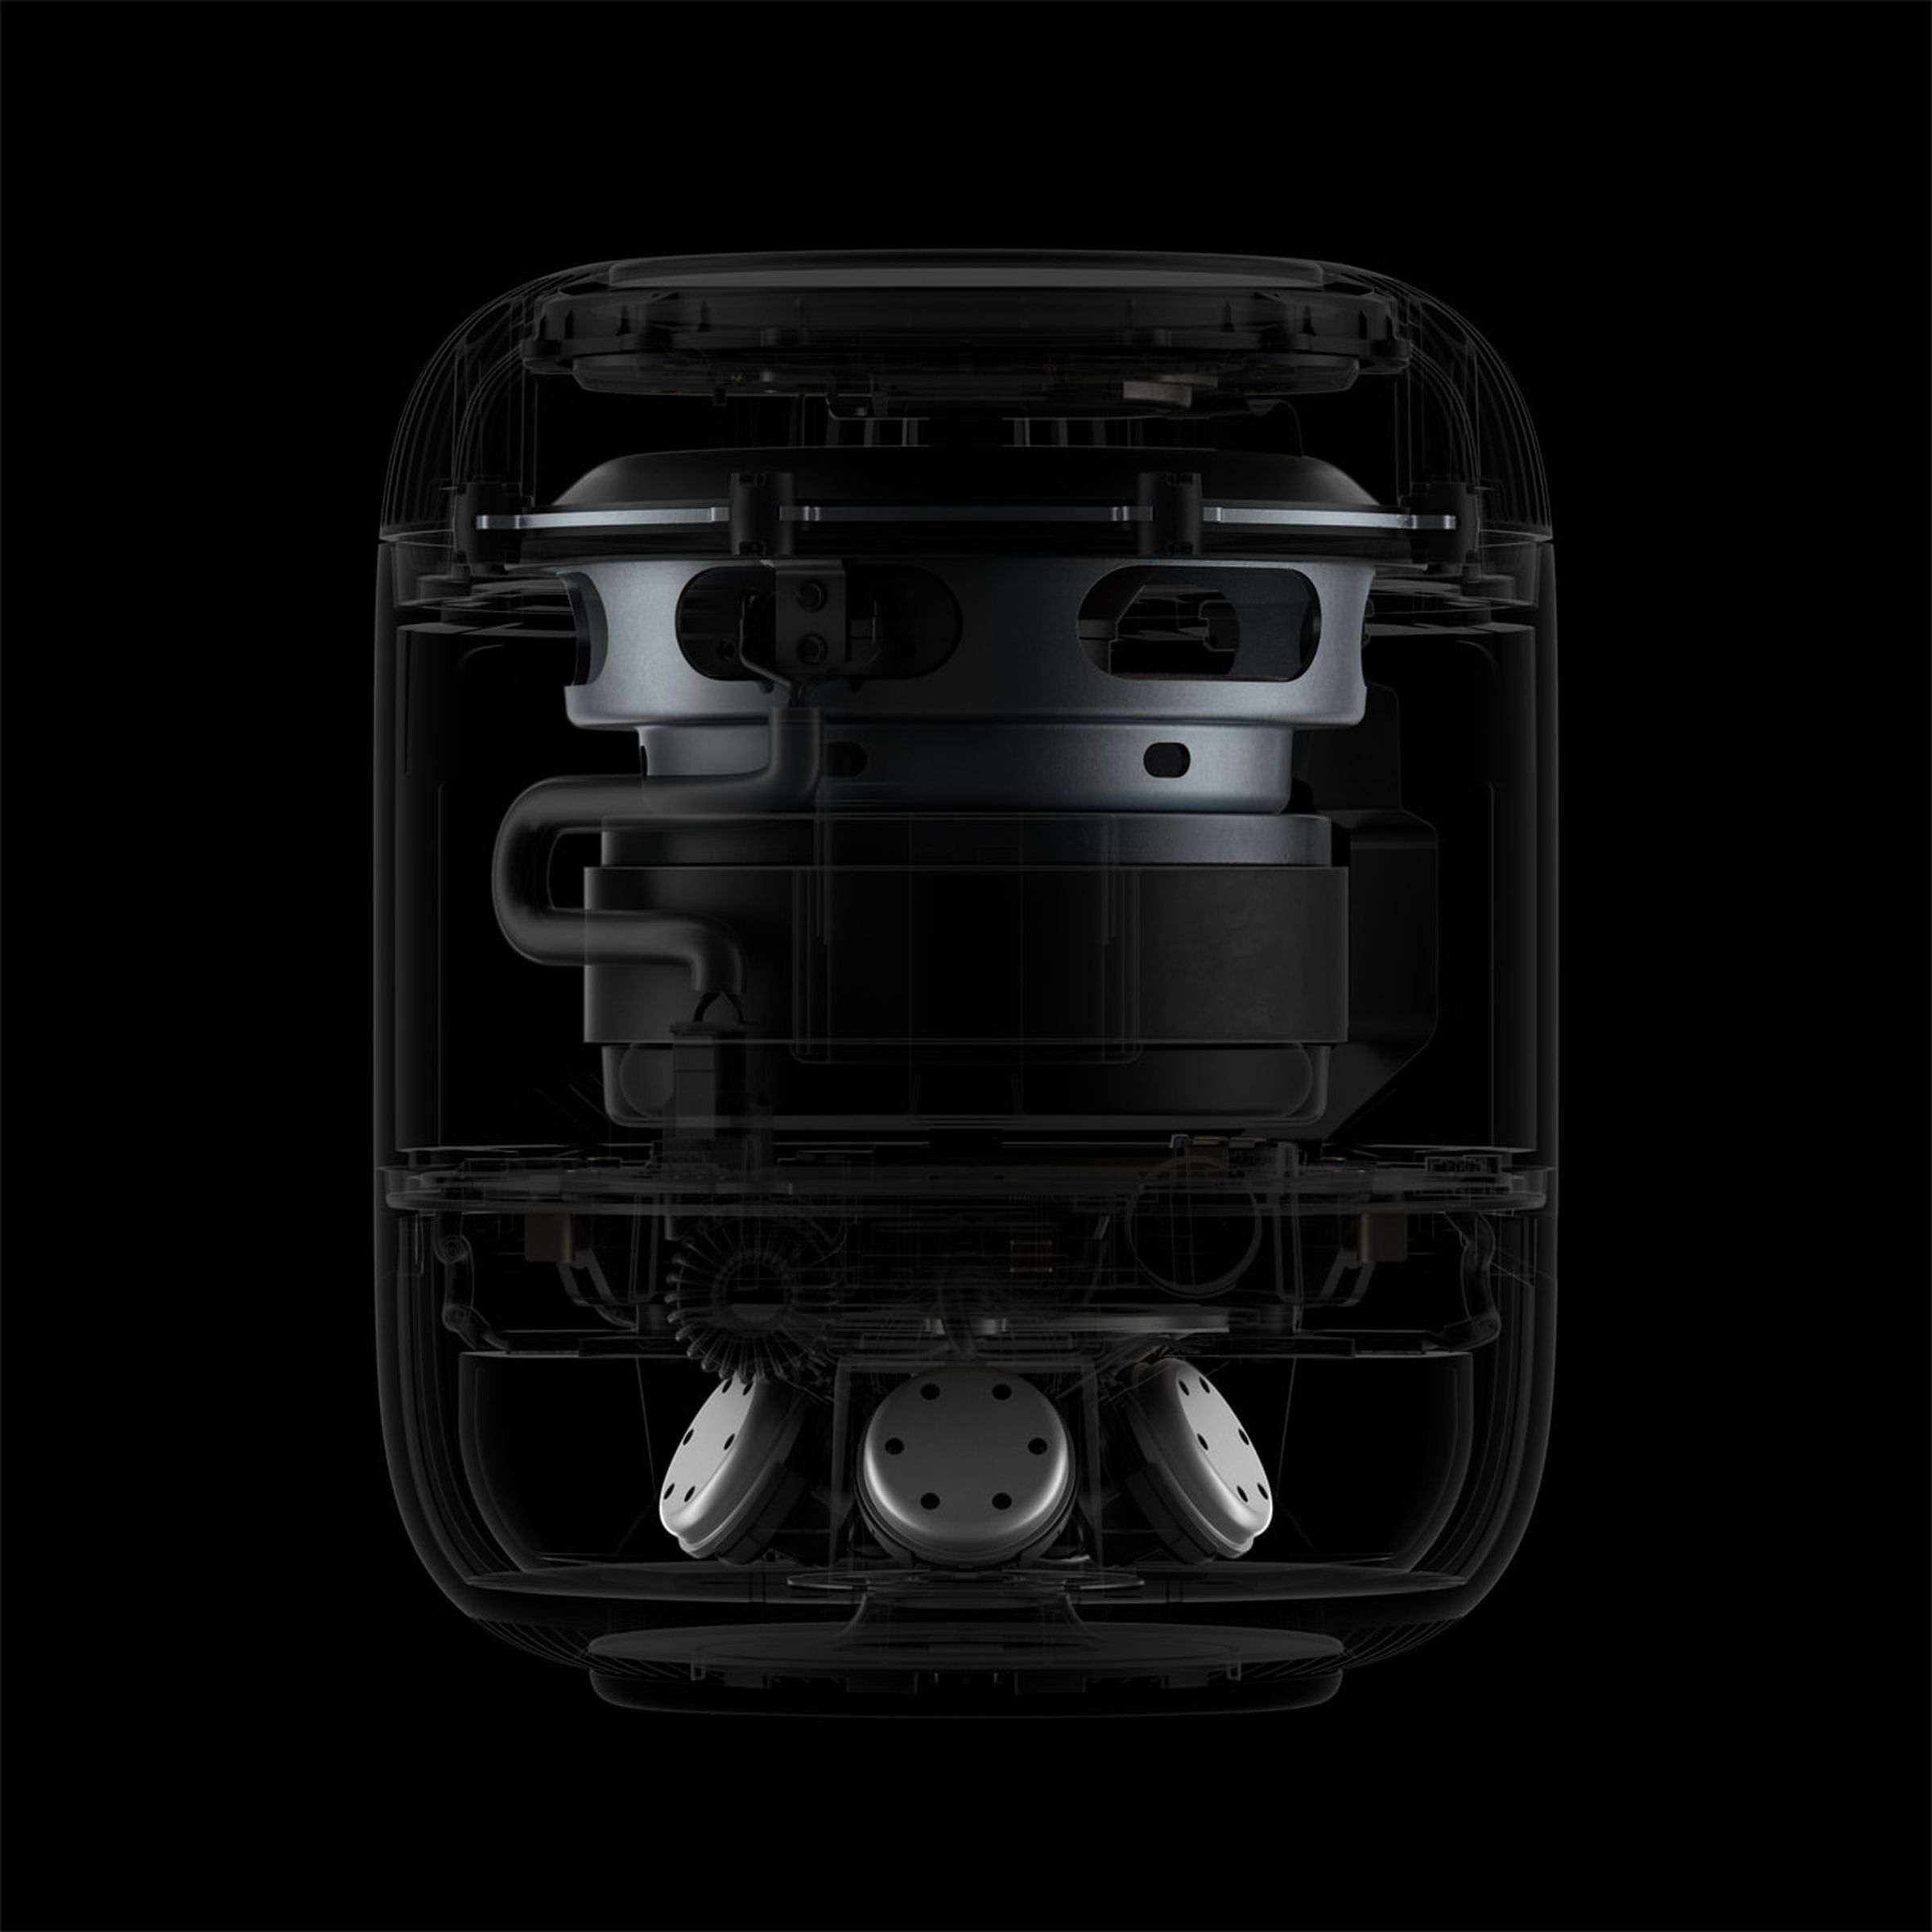 An image displaying the internal components of Apple’s second-gen HomePod.